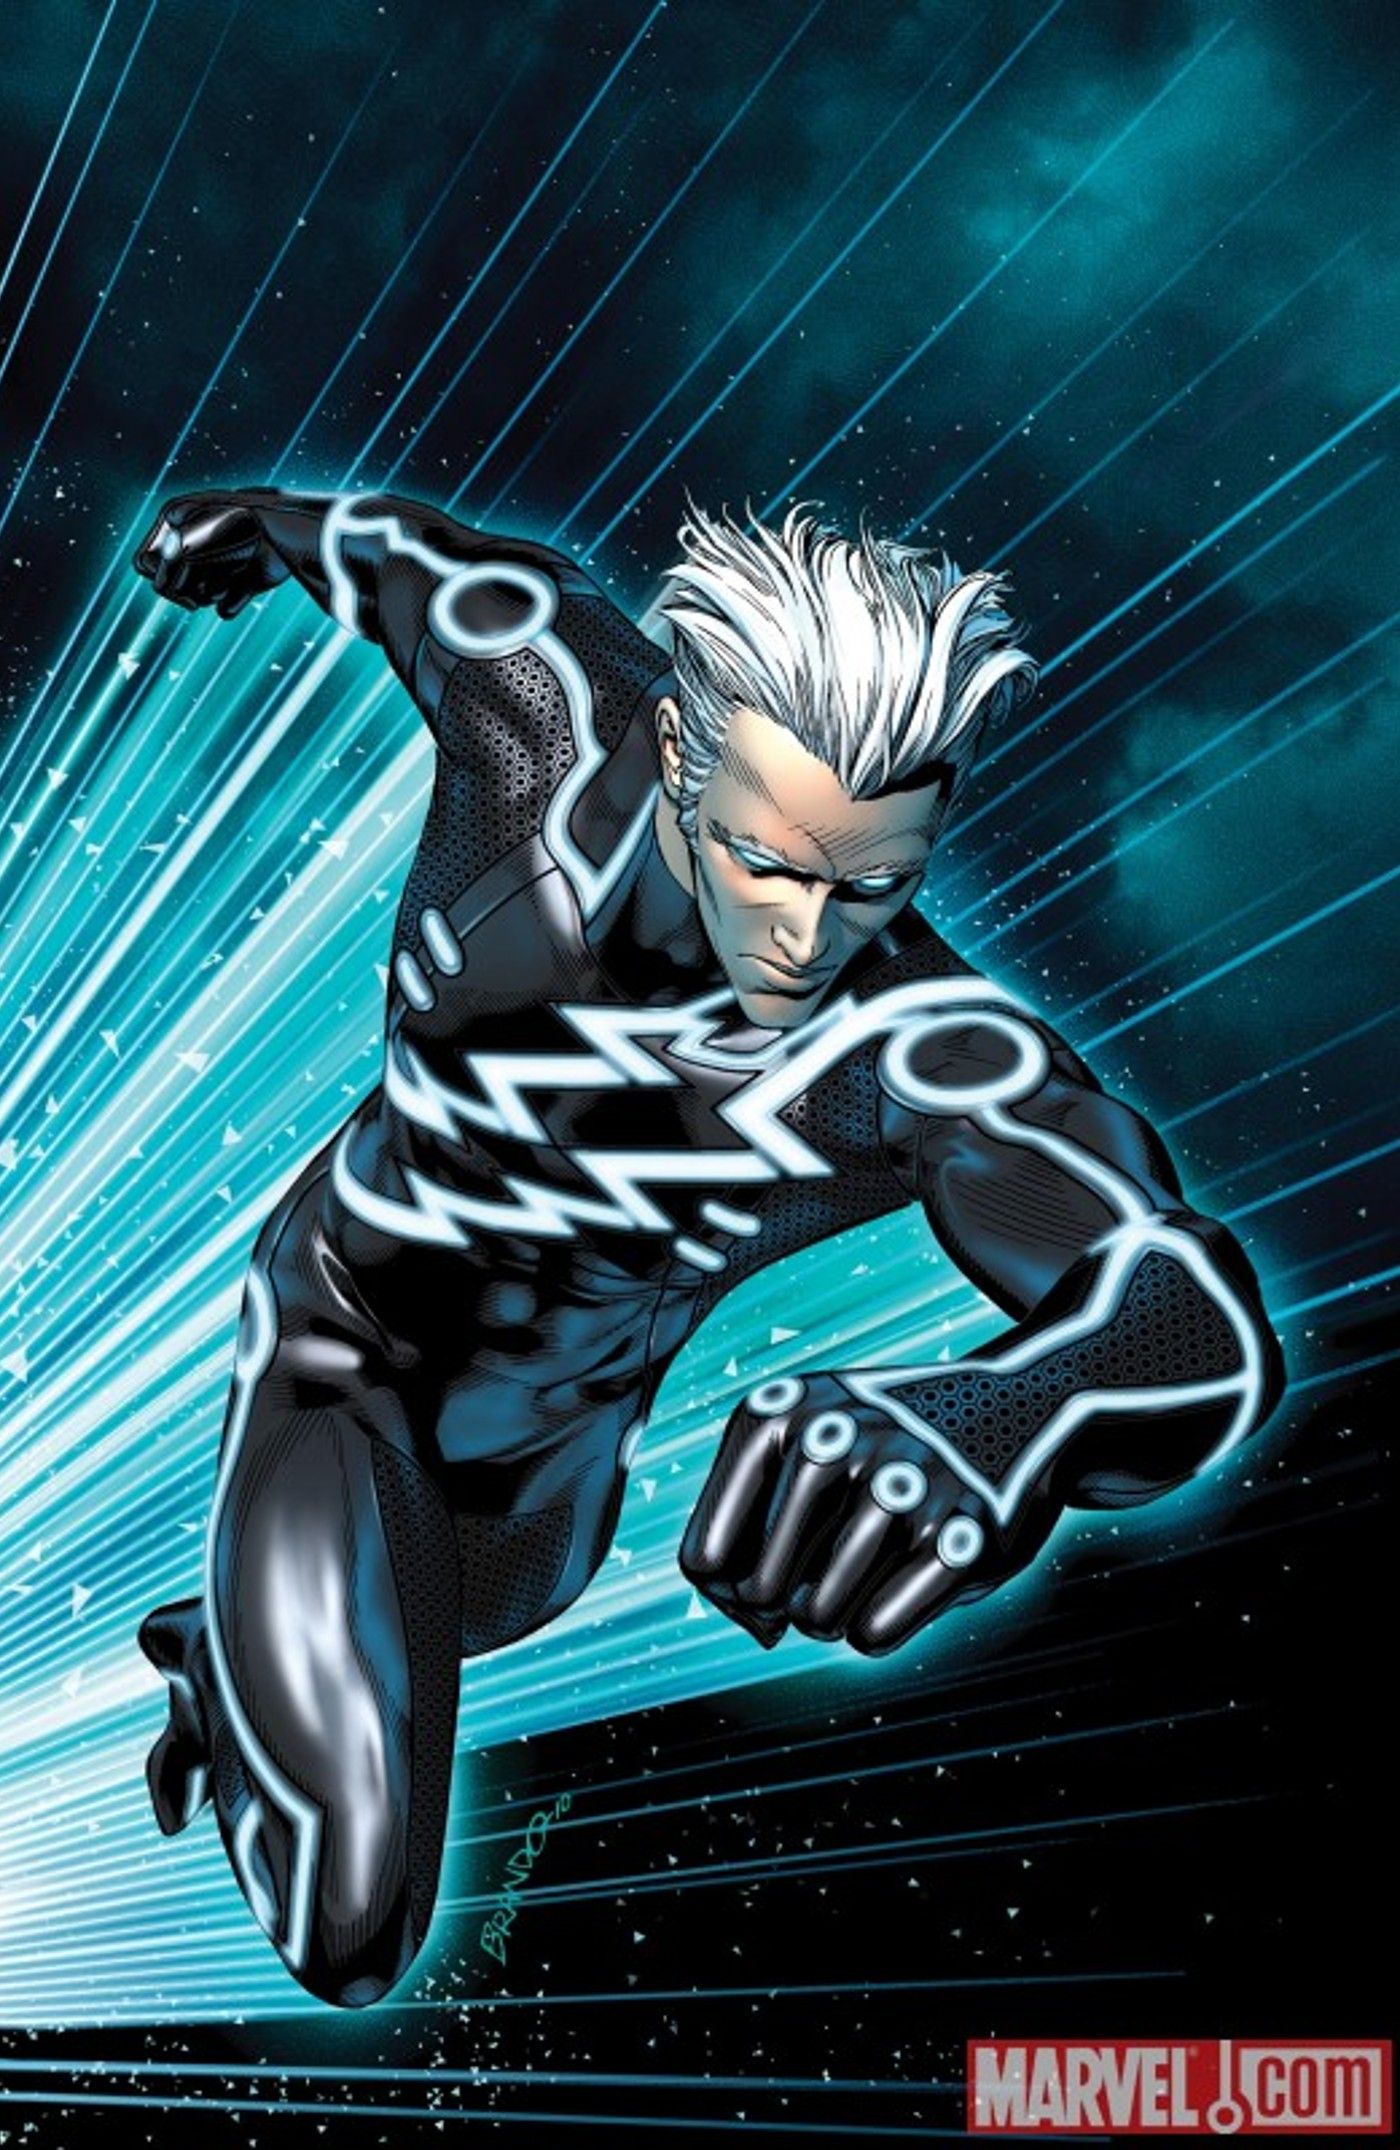 Quicksilver’s Official Tron Costume Is the Best He Ever Had